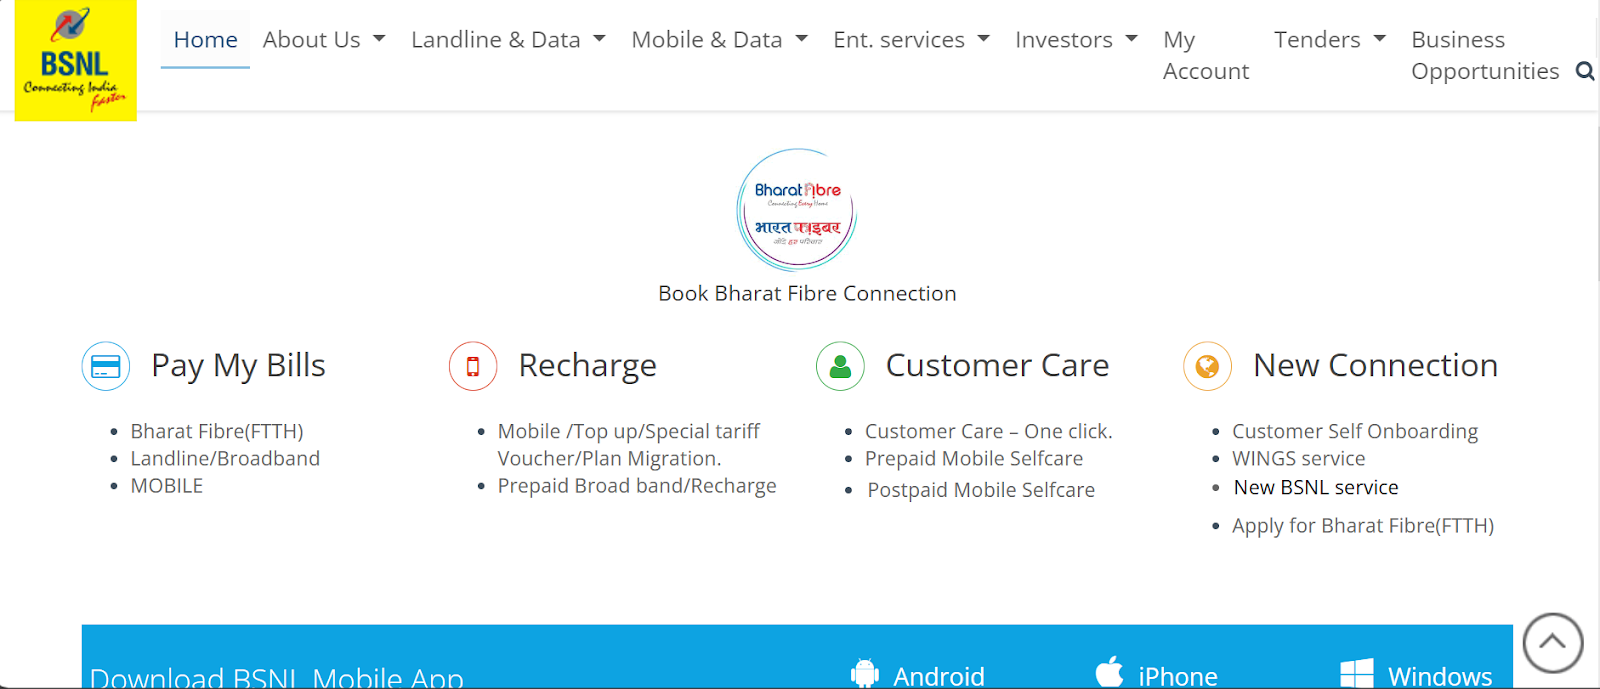 BSNL website snapshot highlighting the services it provides.